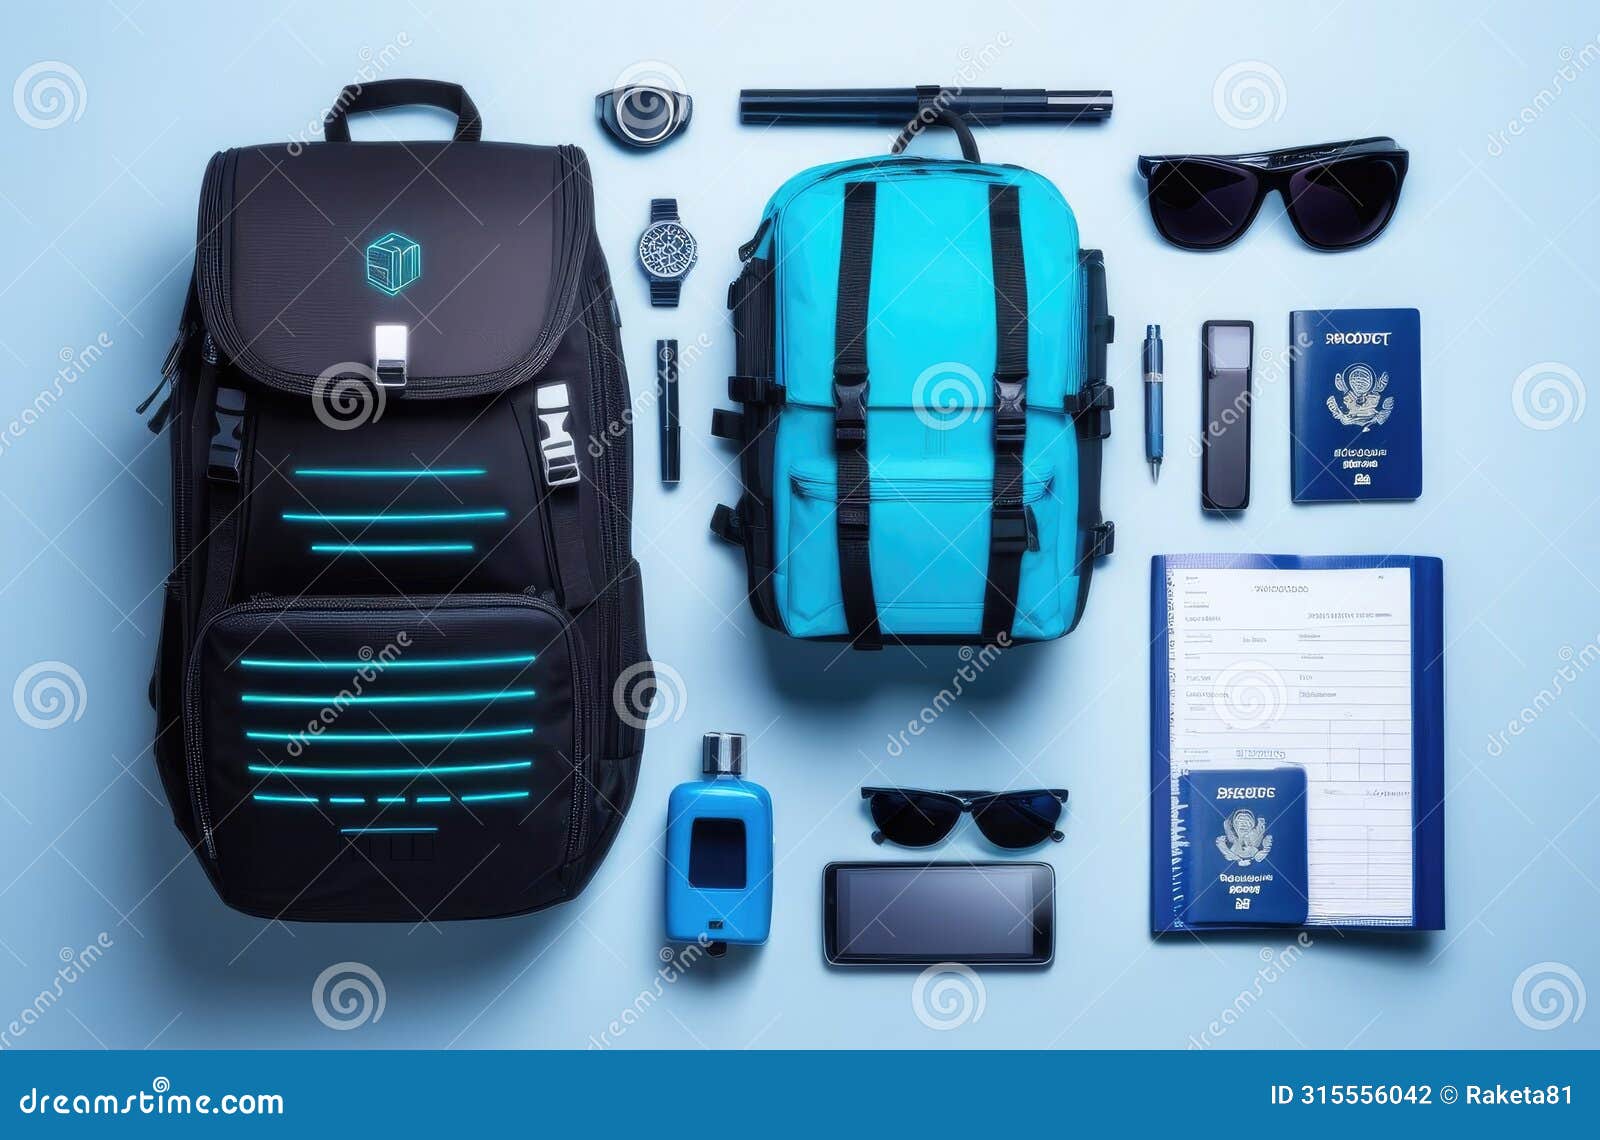 tourist layout - traveler's outfit, cybernetics style backpack, documents, bag,view from above